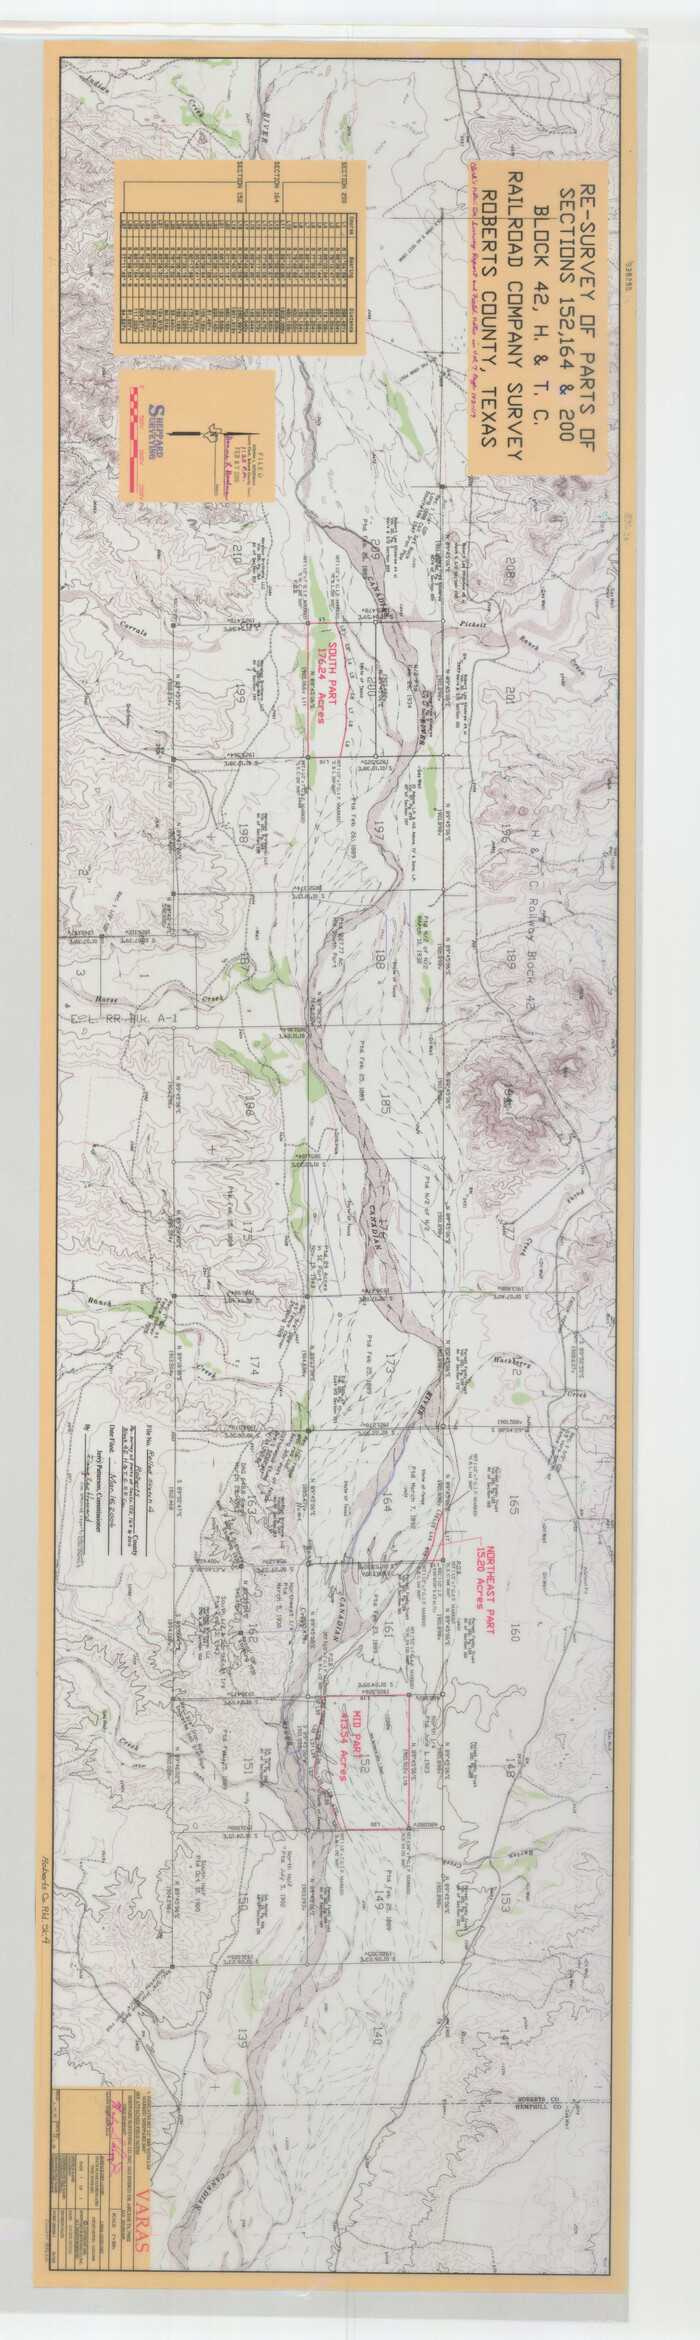 83620, Roberts County Rolled Sketch 4, General Map Collection